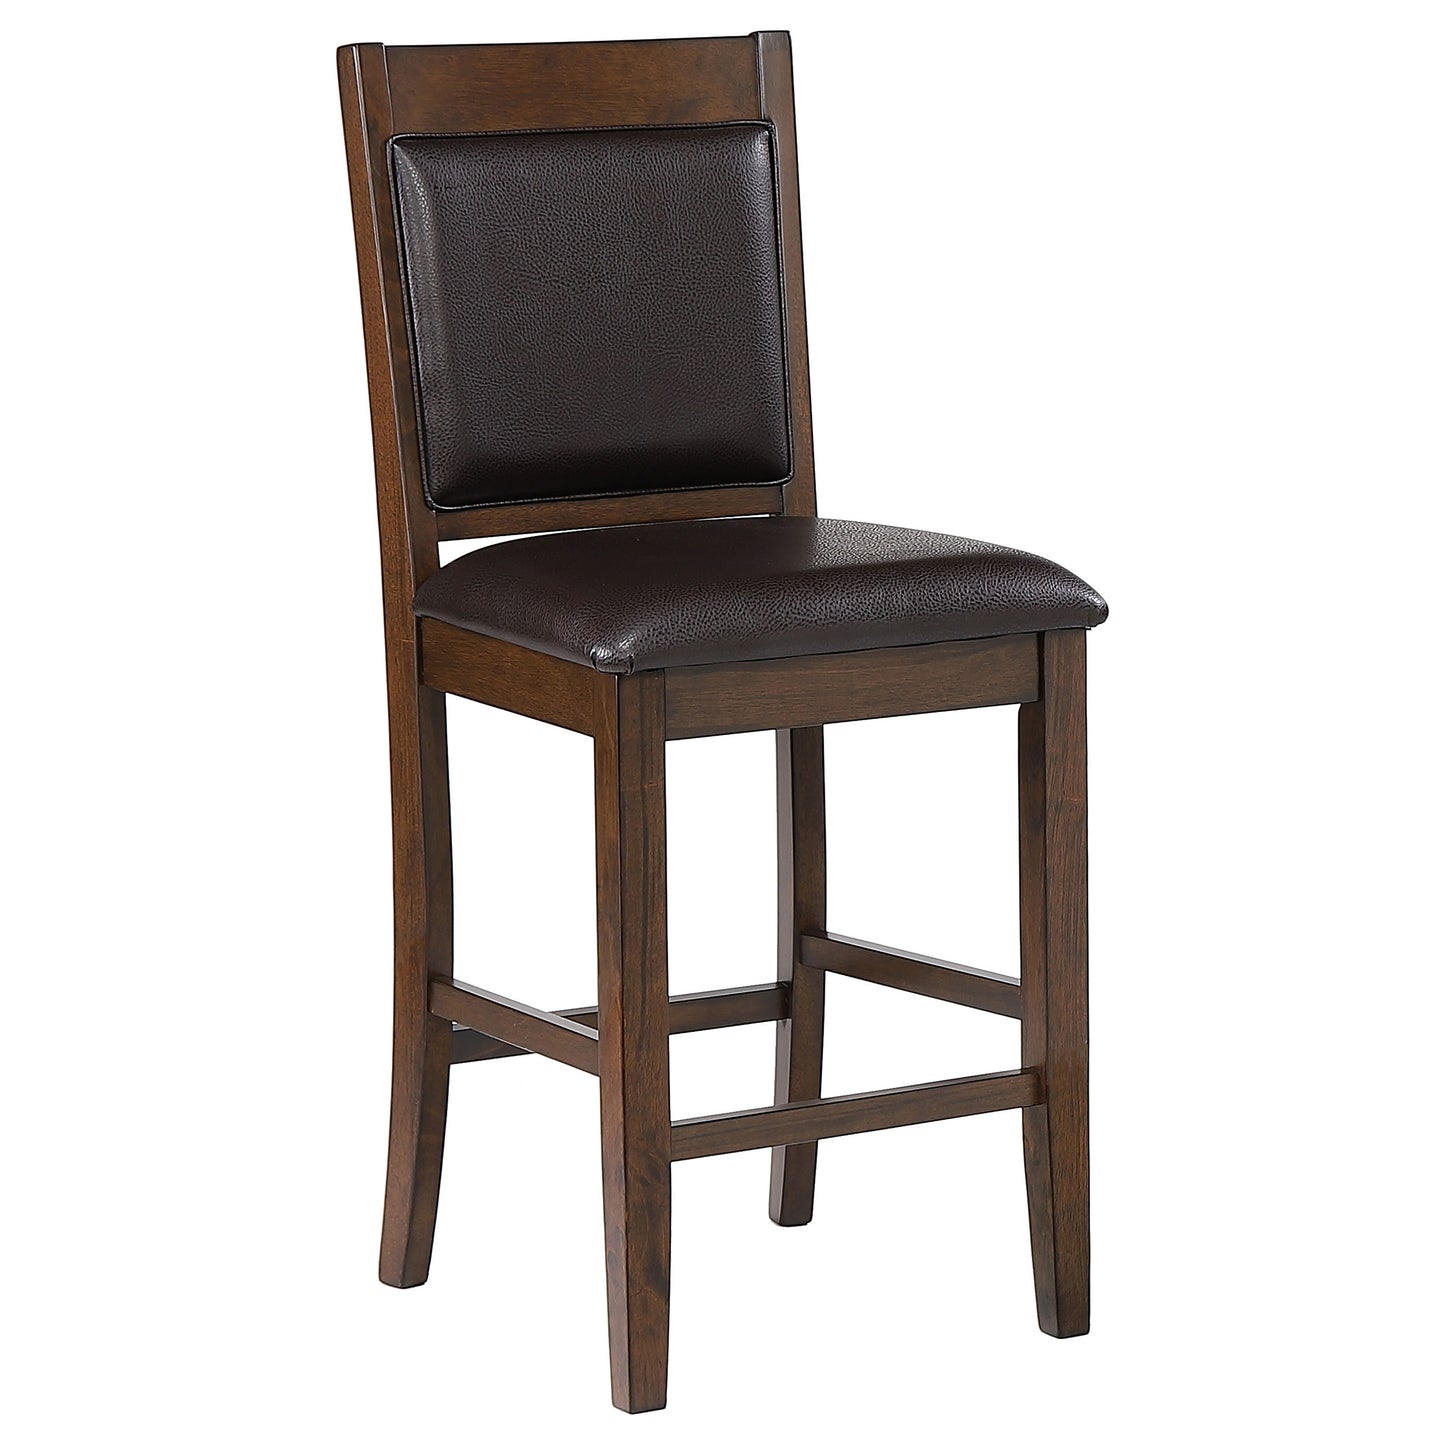 Dewey Upholstered Counter Height Chairs with Footrest (Set of 2) Brown and Walnut